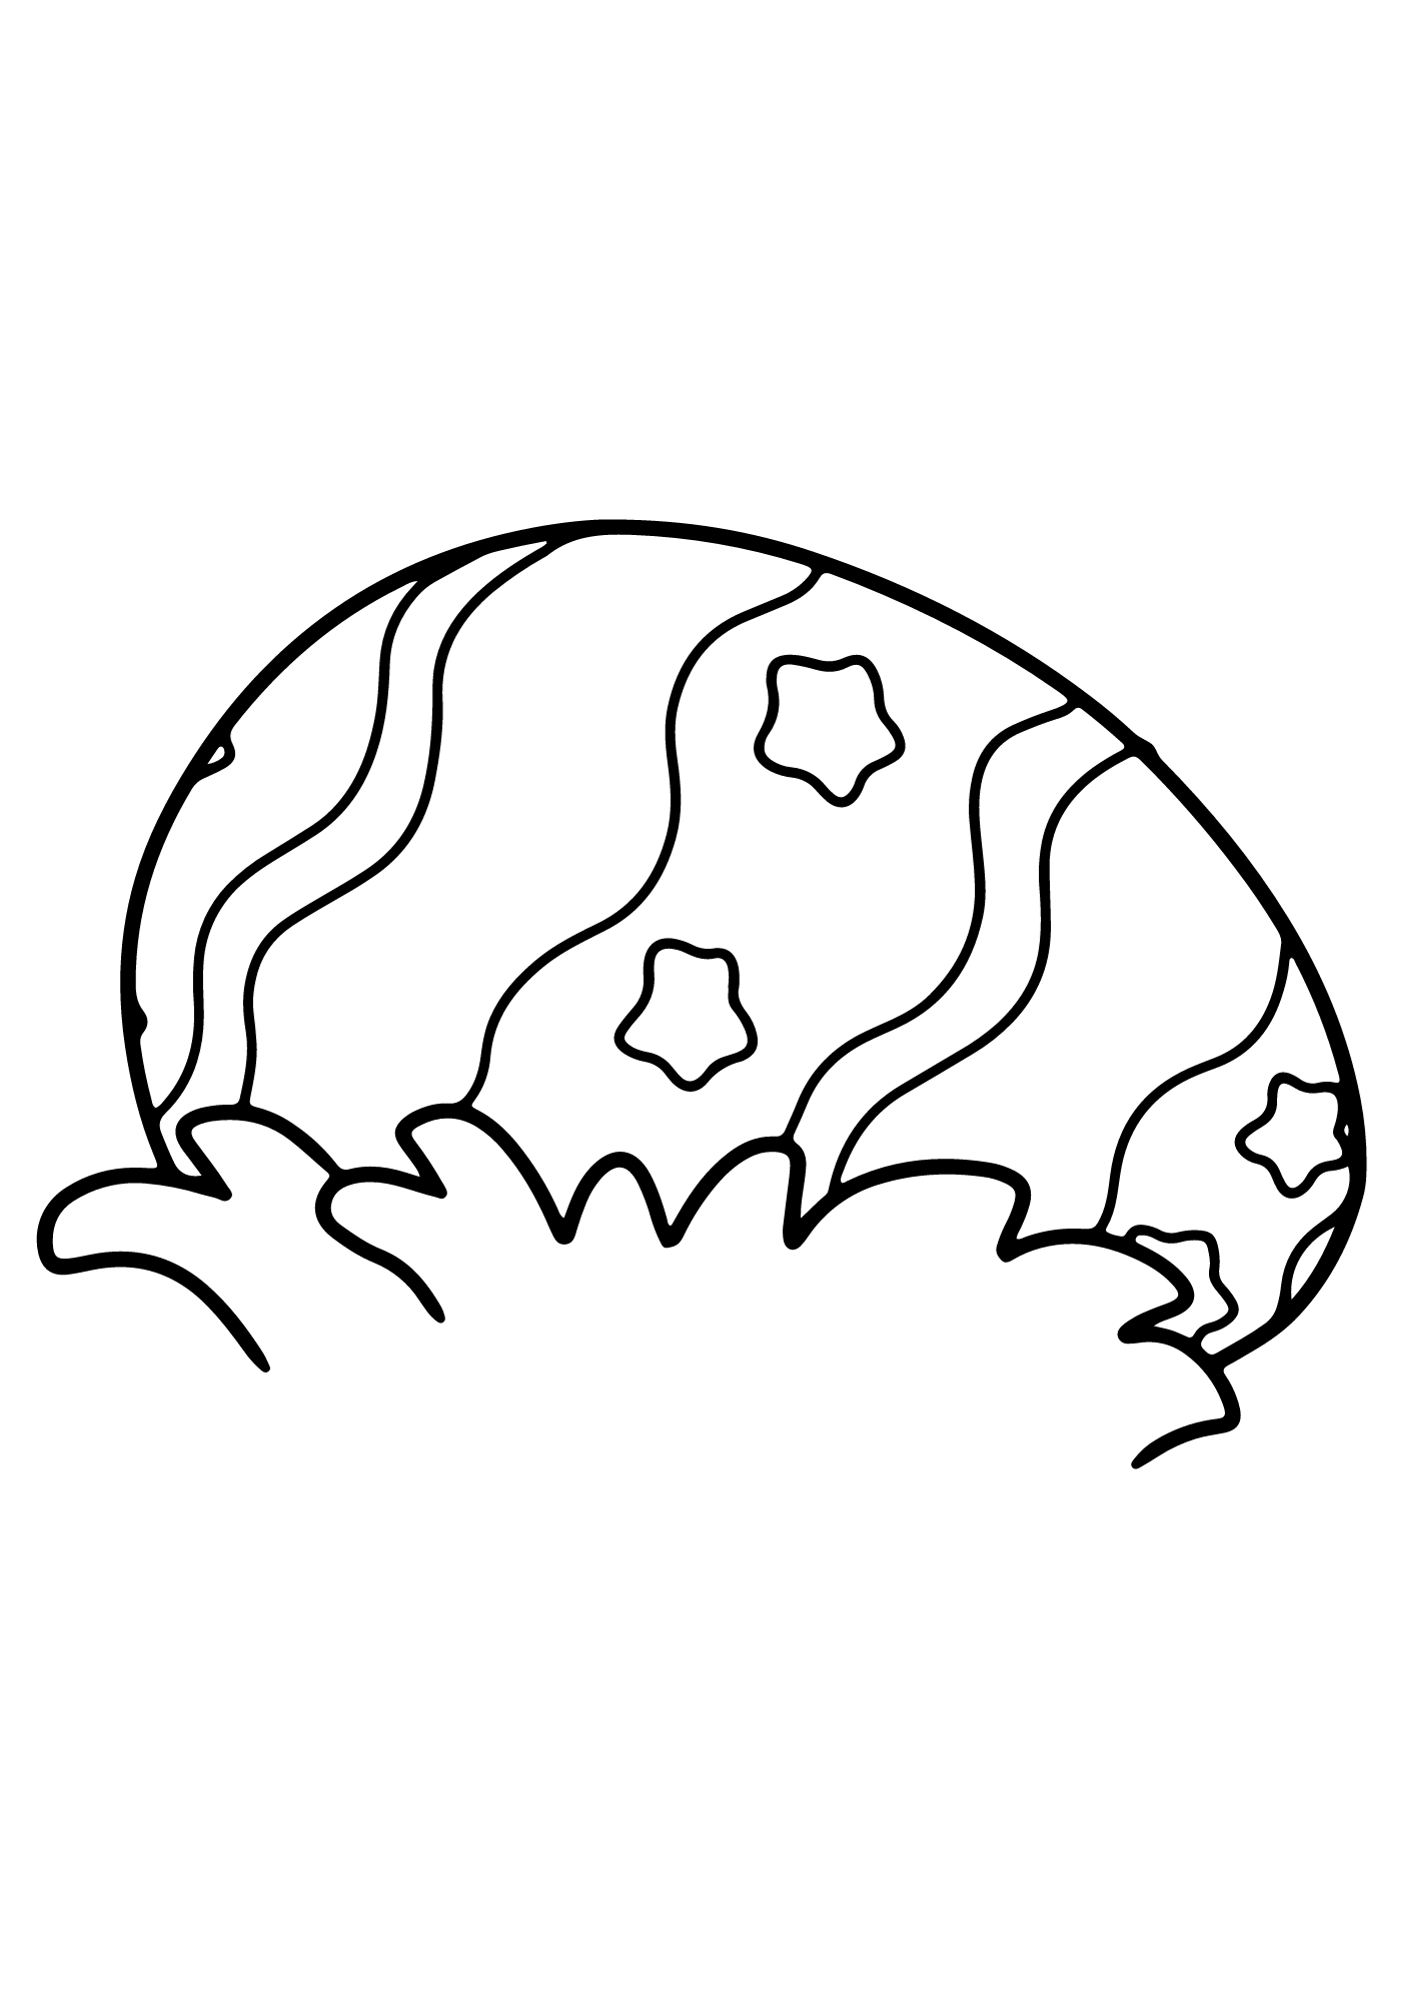 Easter Egg Black And White Coloring Page